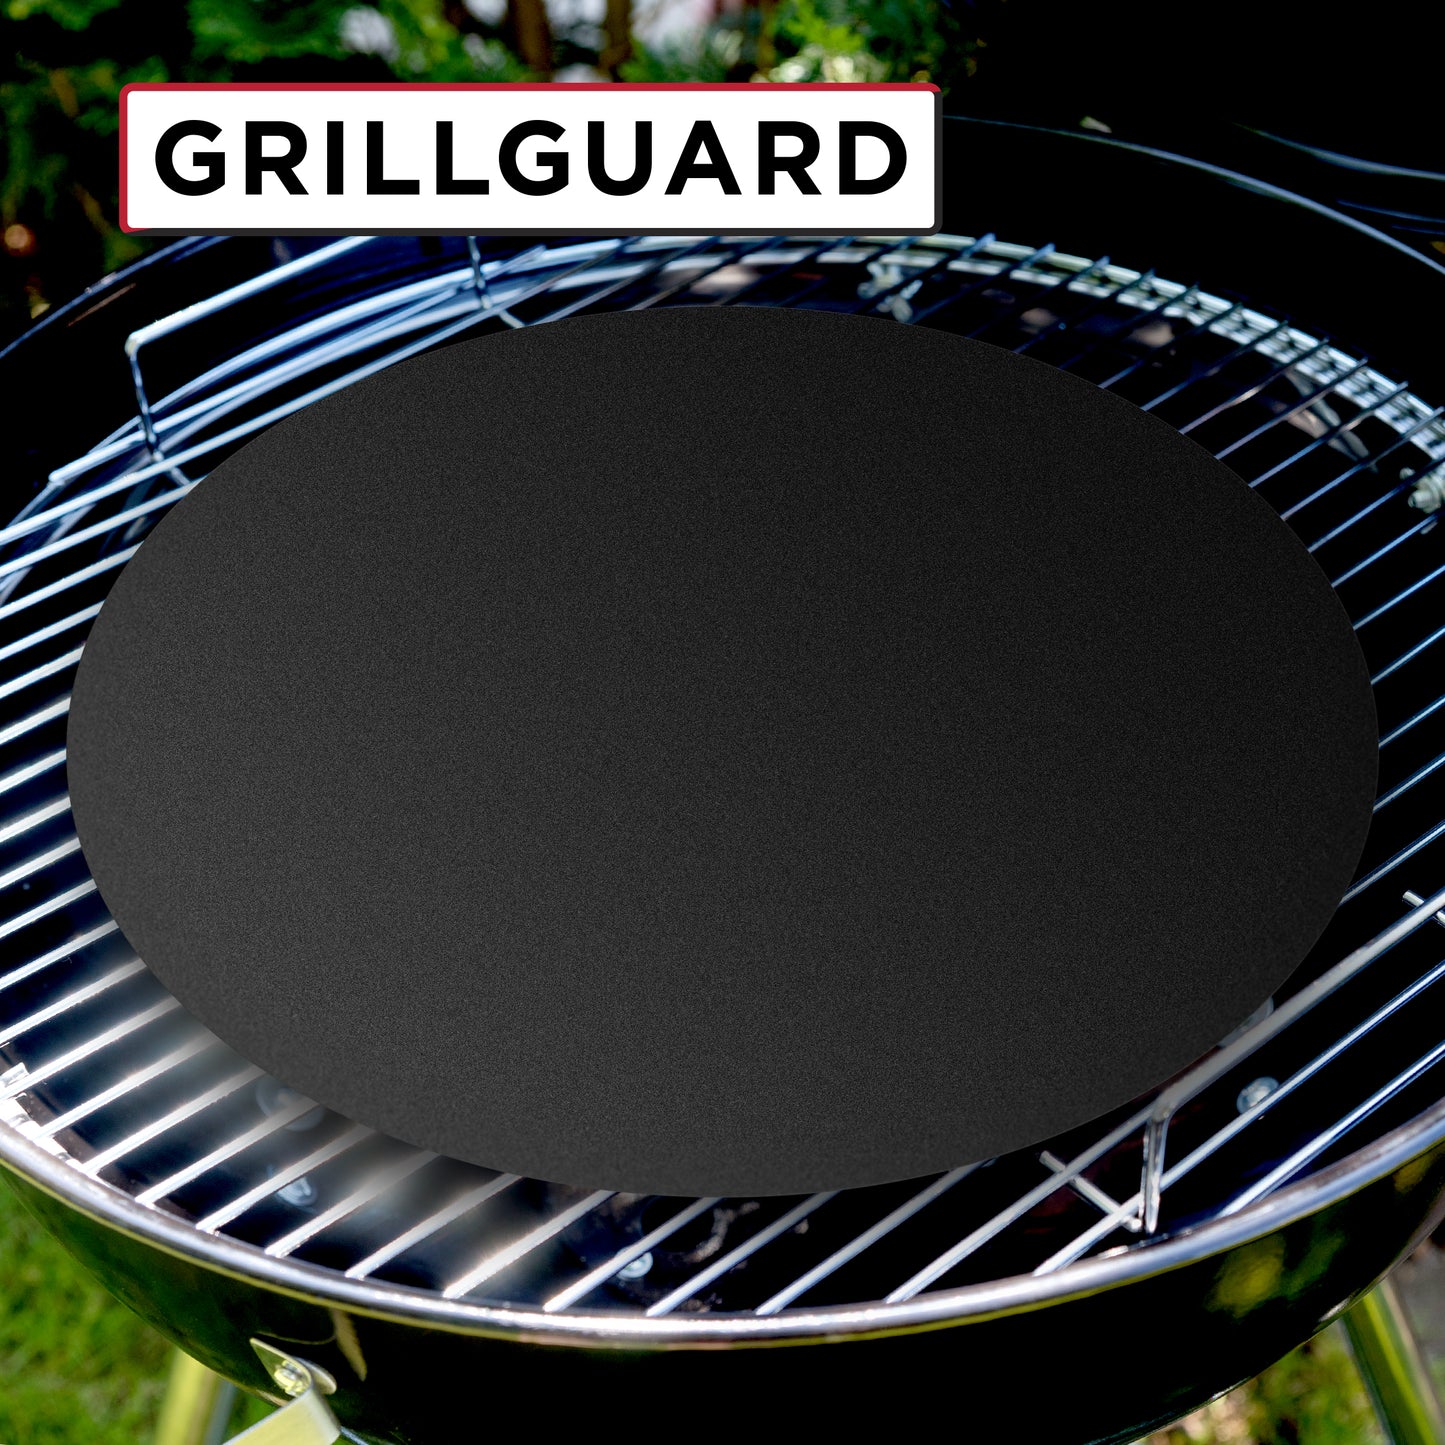 Universal GrillGuard for Rectangular and Round Grills | 100% FDA Approved and PFOA/BPA Free